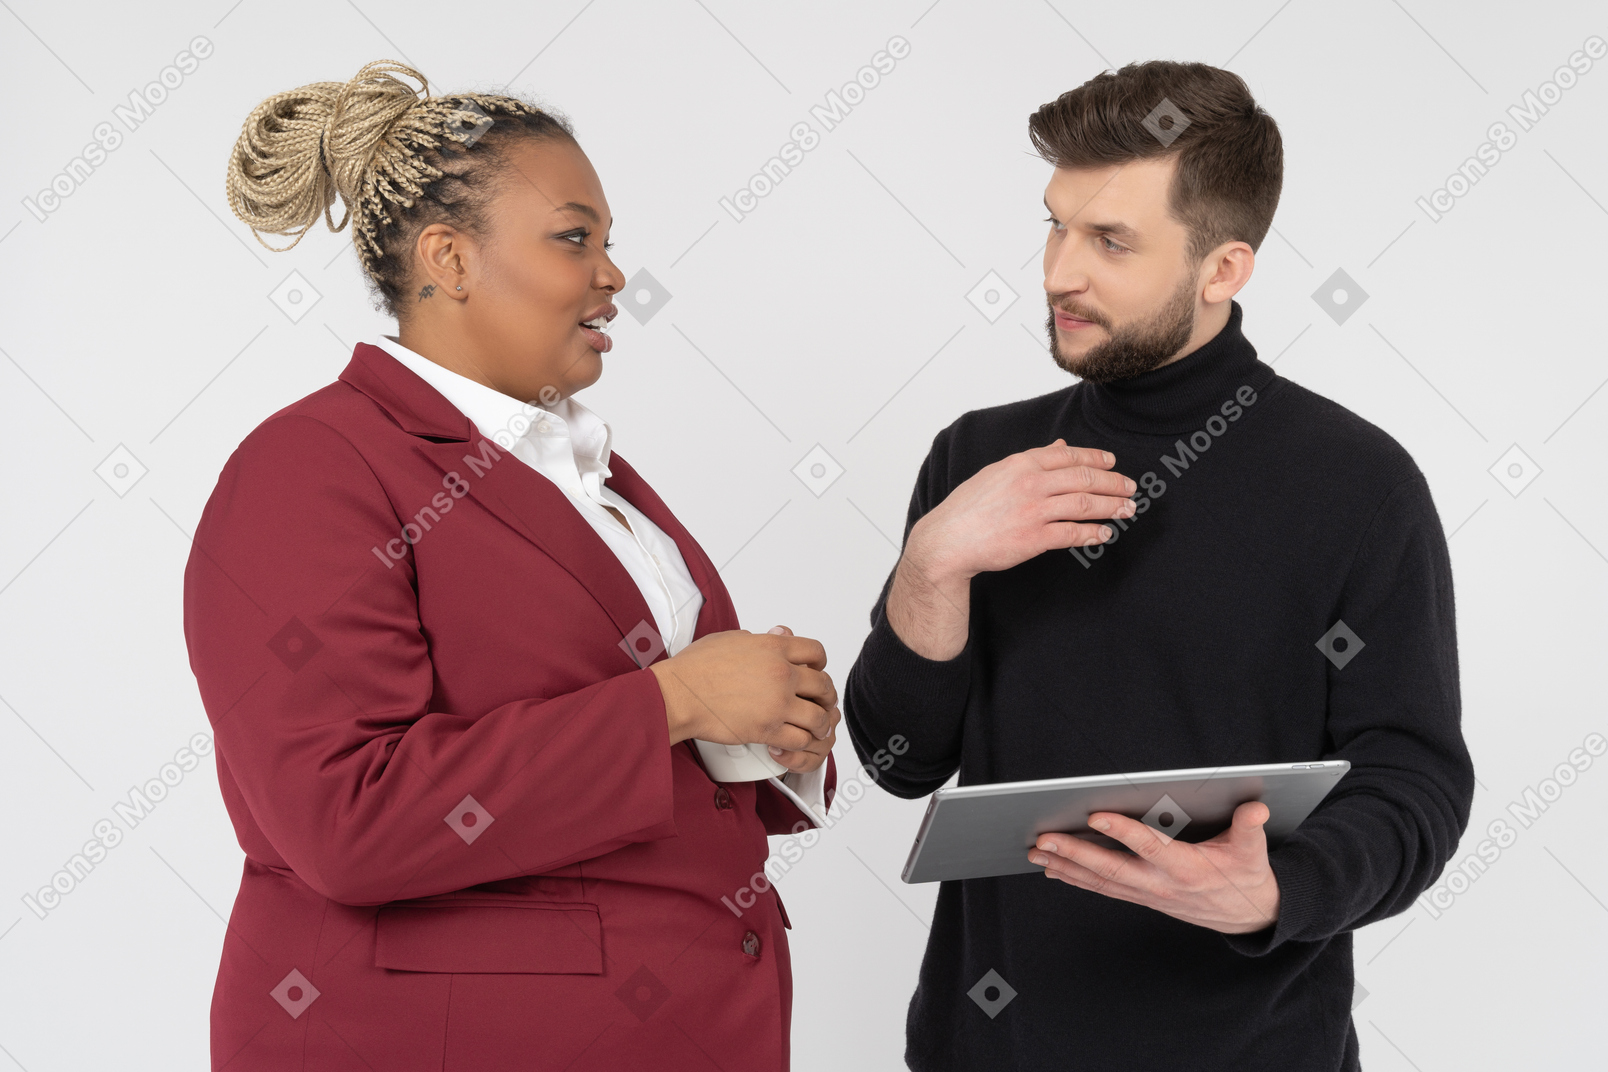 Coworkers discussing the work